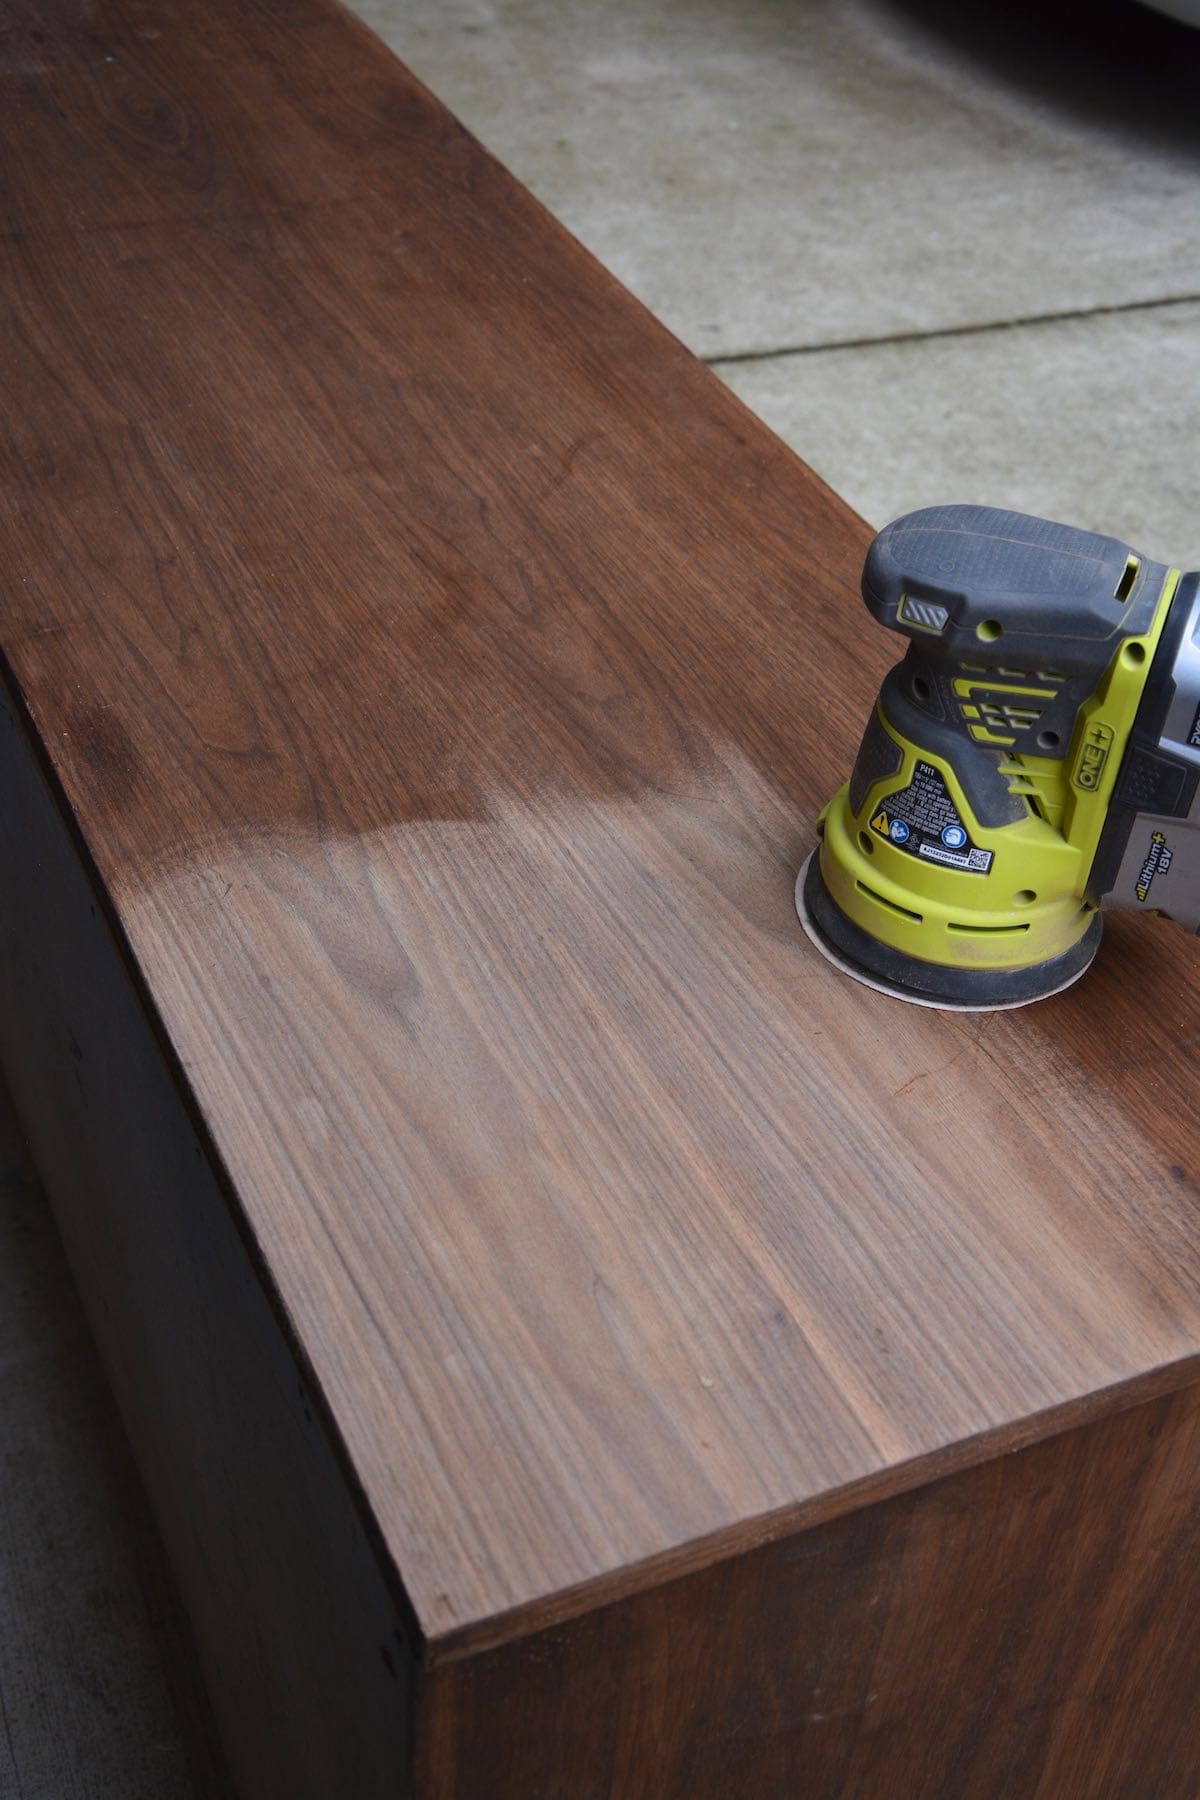 How to Strip Furniture and Stain Wood - Strip vs. sand old furniture. Use an orbital sander to strip furniture. Everything You Wanted to Know About Furniture Stripping If You're a Newbie - Thrift Diving 